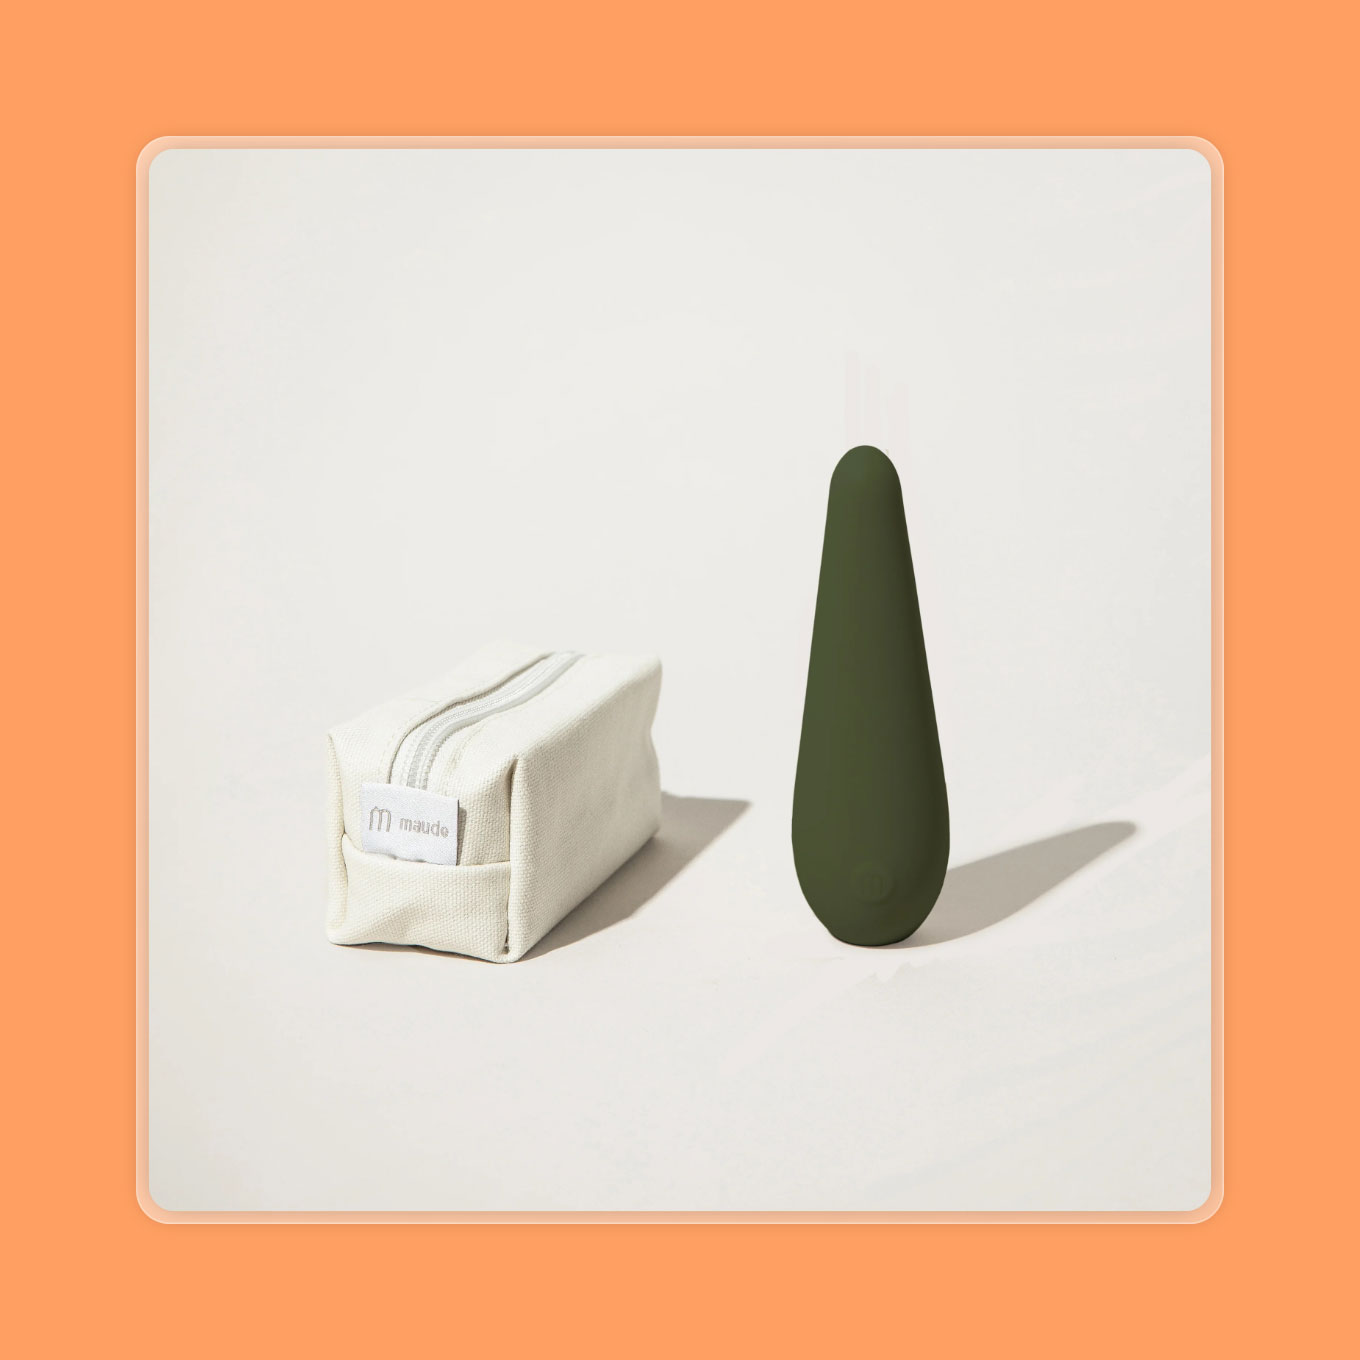 A forest green vibrator sits next to a canvas carrying pouch